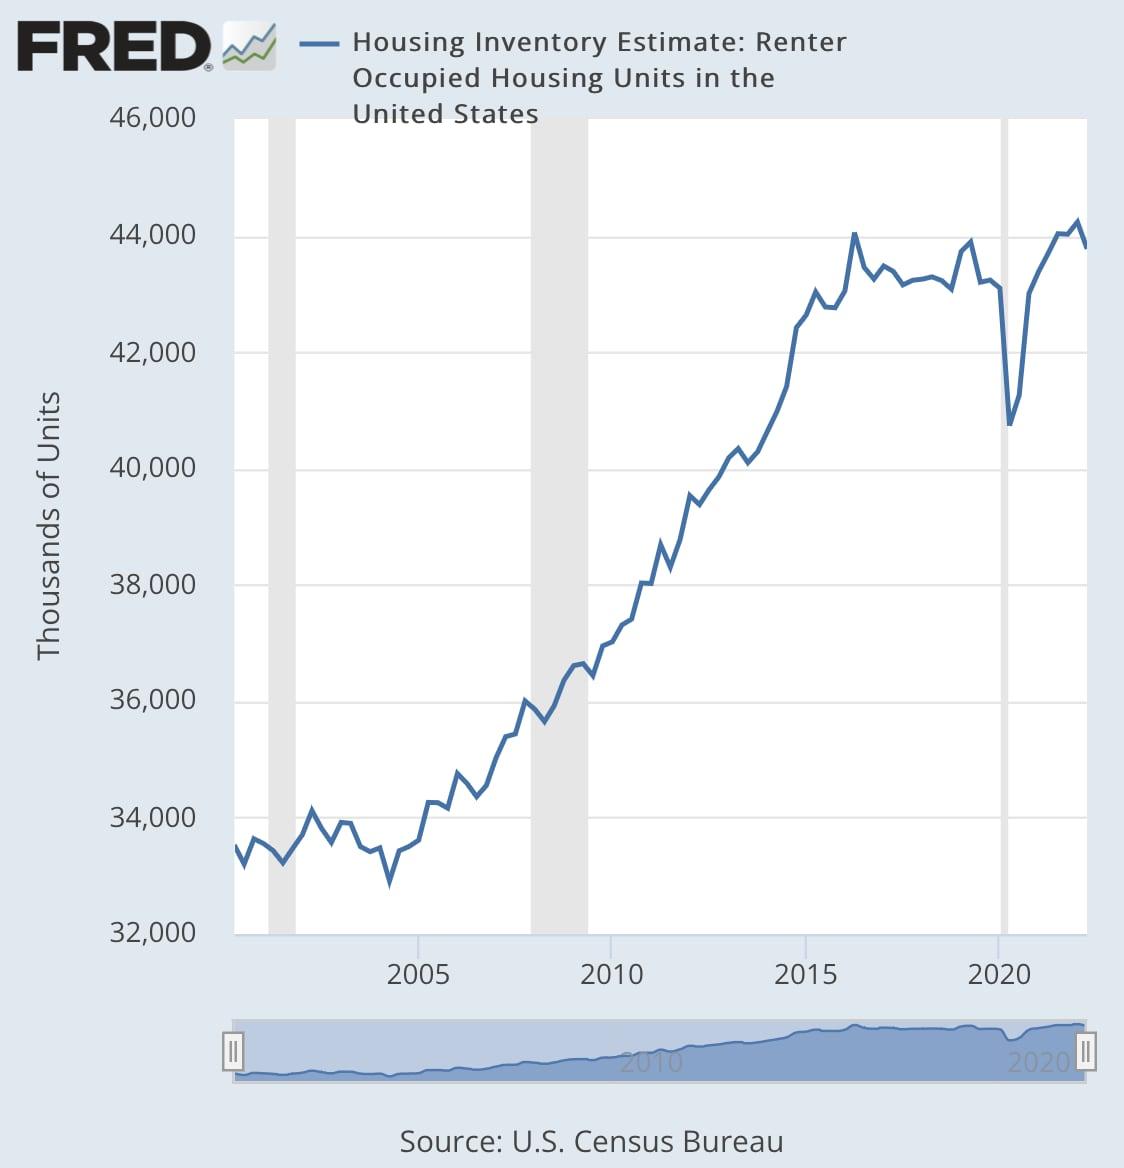 Chart of Housing Inventory Estimate: Renter Occupied Housing Units in the United States